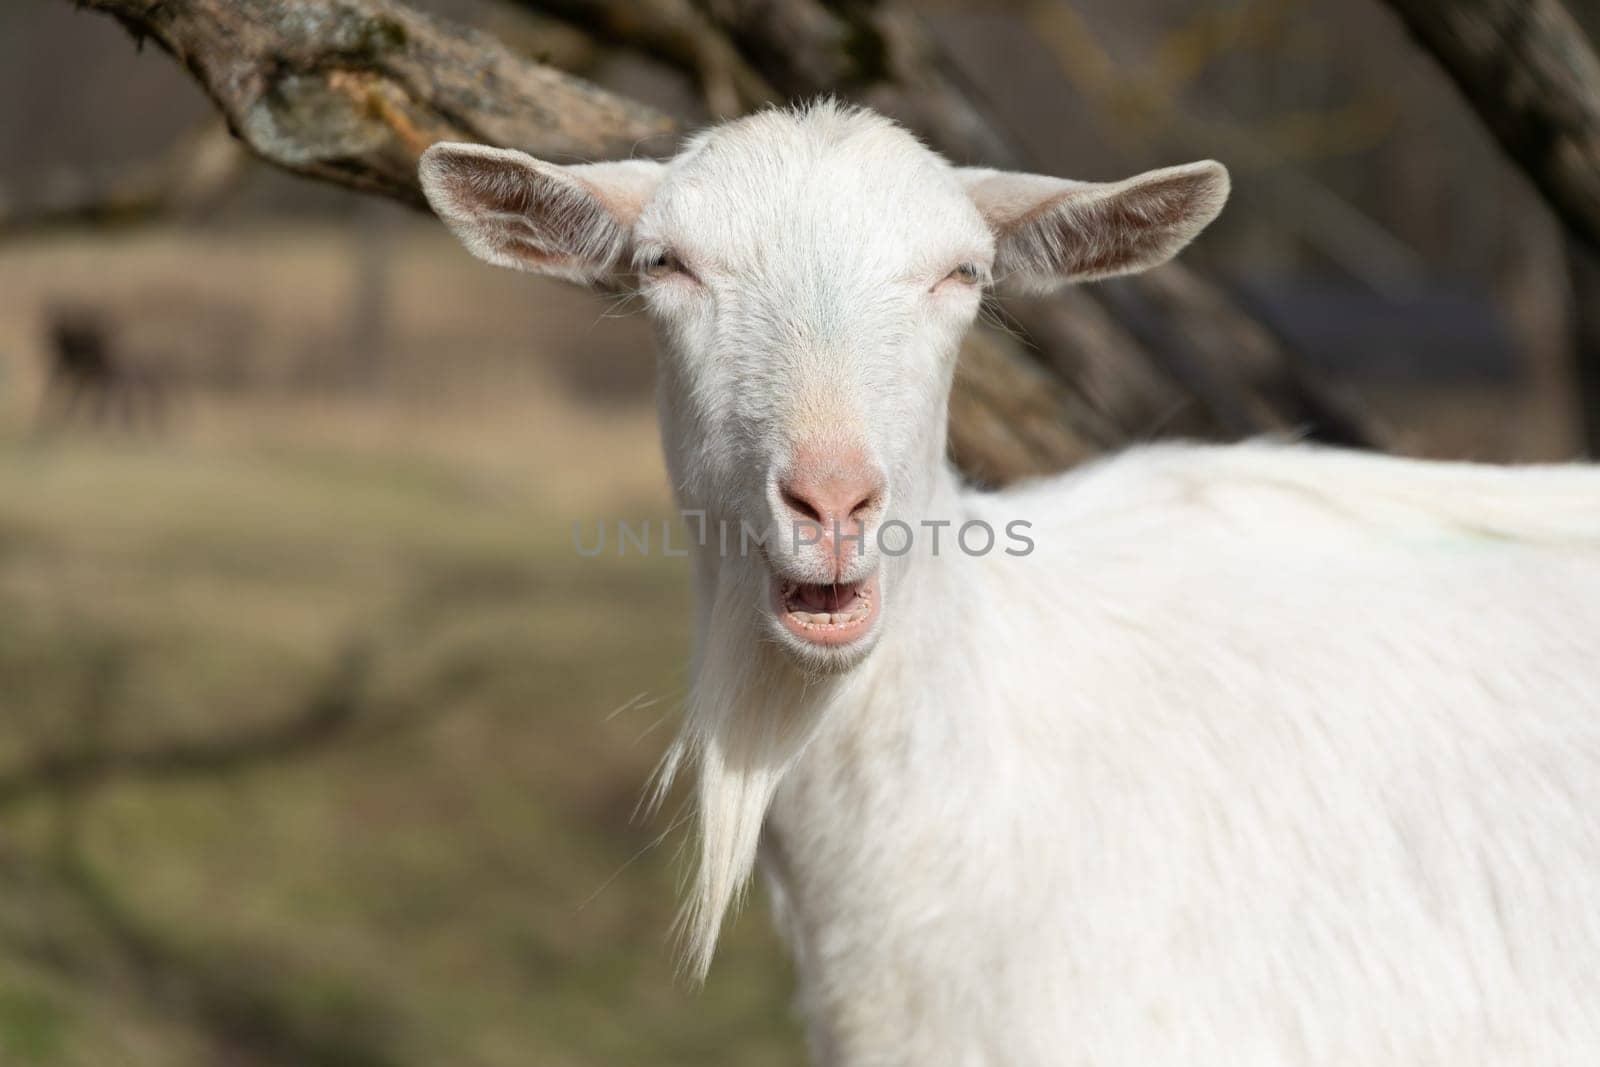 A close-up view of a goat standing next to a tree, munching on leaves and grass on the ground. The goats fur is brown and white, and its horns are visible.